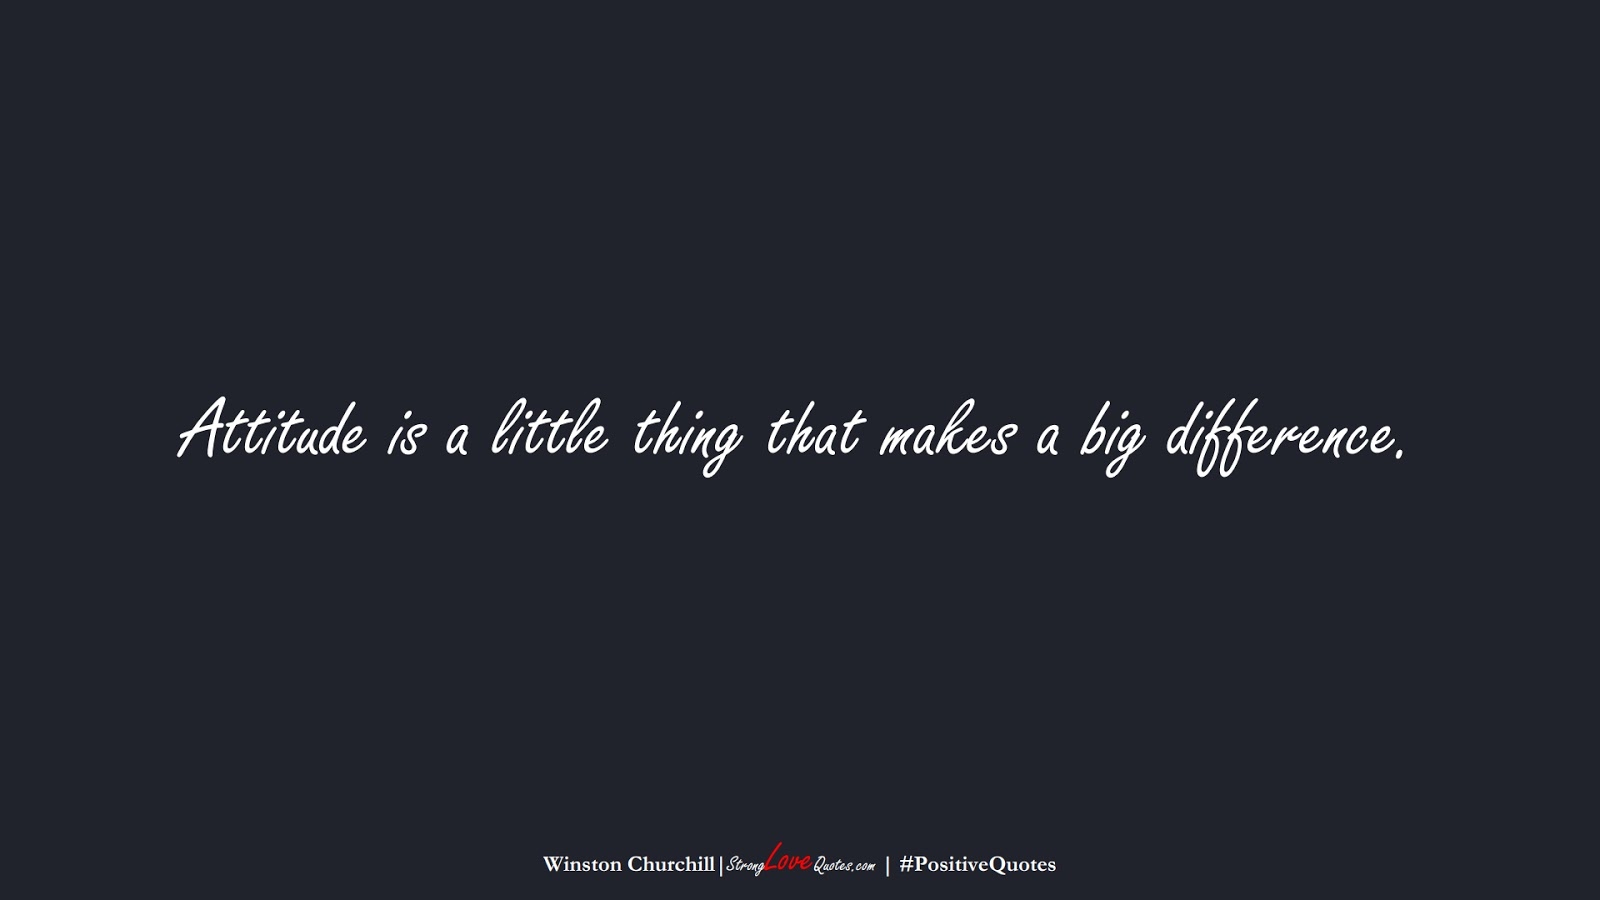 Attitude is a little thing that makes a big difference. (Winston Churchill);  #PositiveQuotes